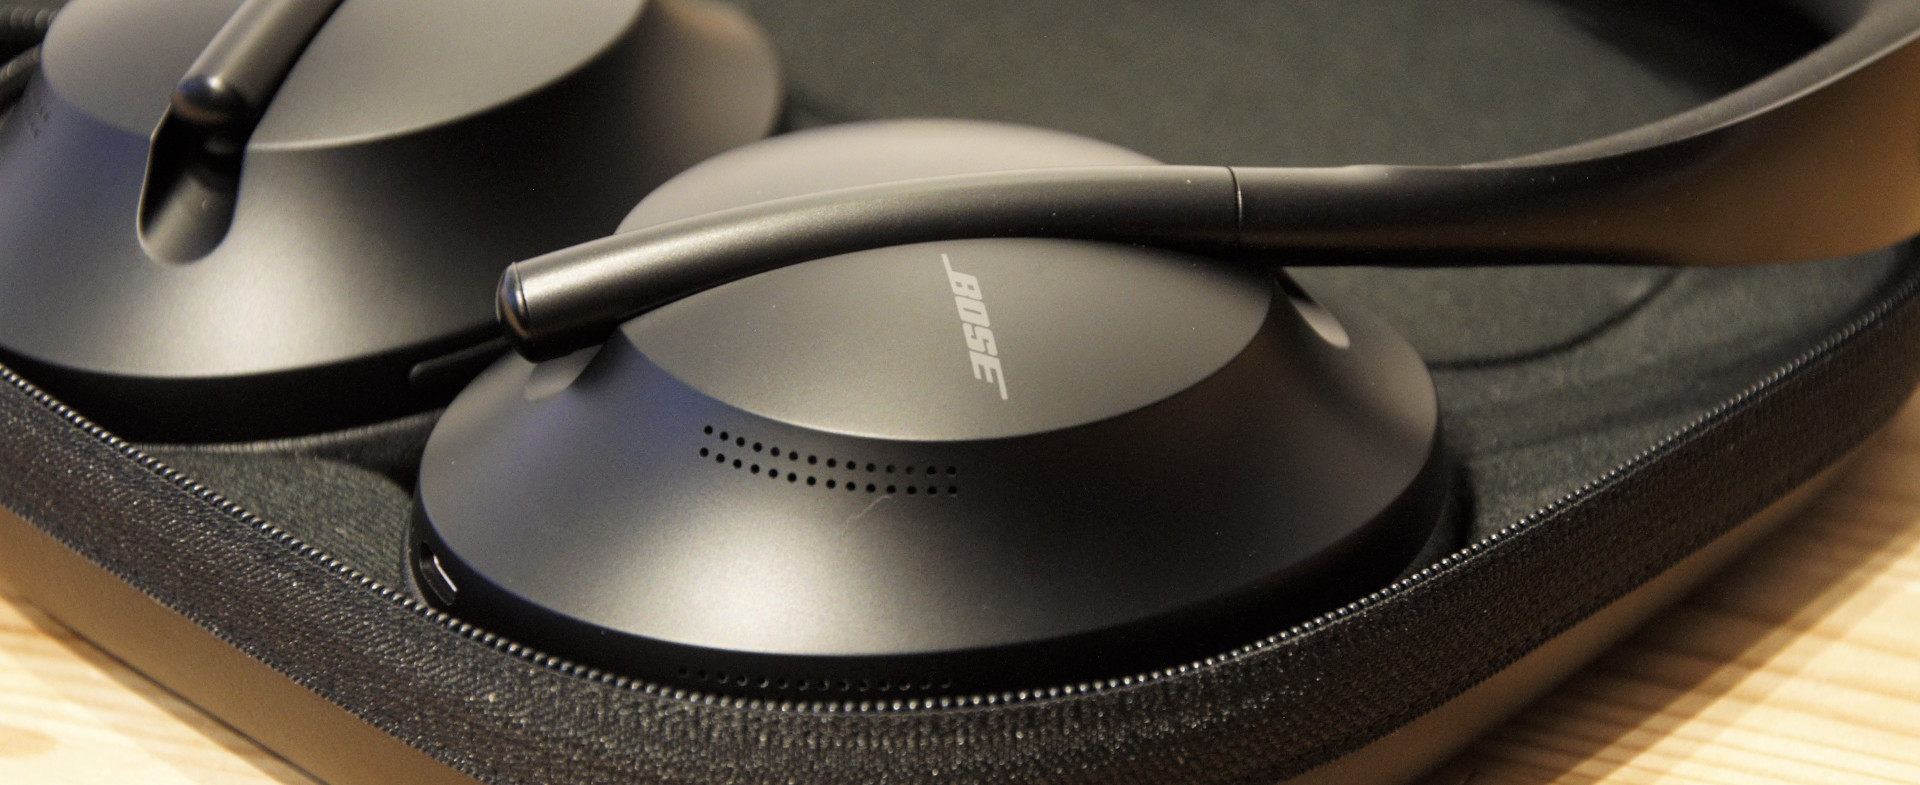 BOSE NOISE CANCELLING 700 UC BLACK | camillevieraservices.com